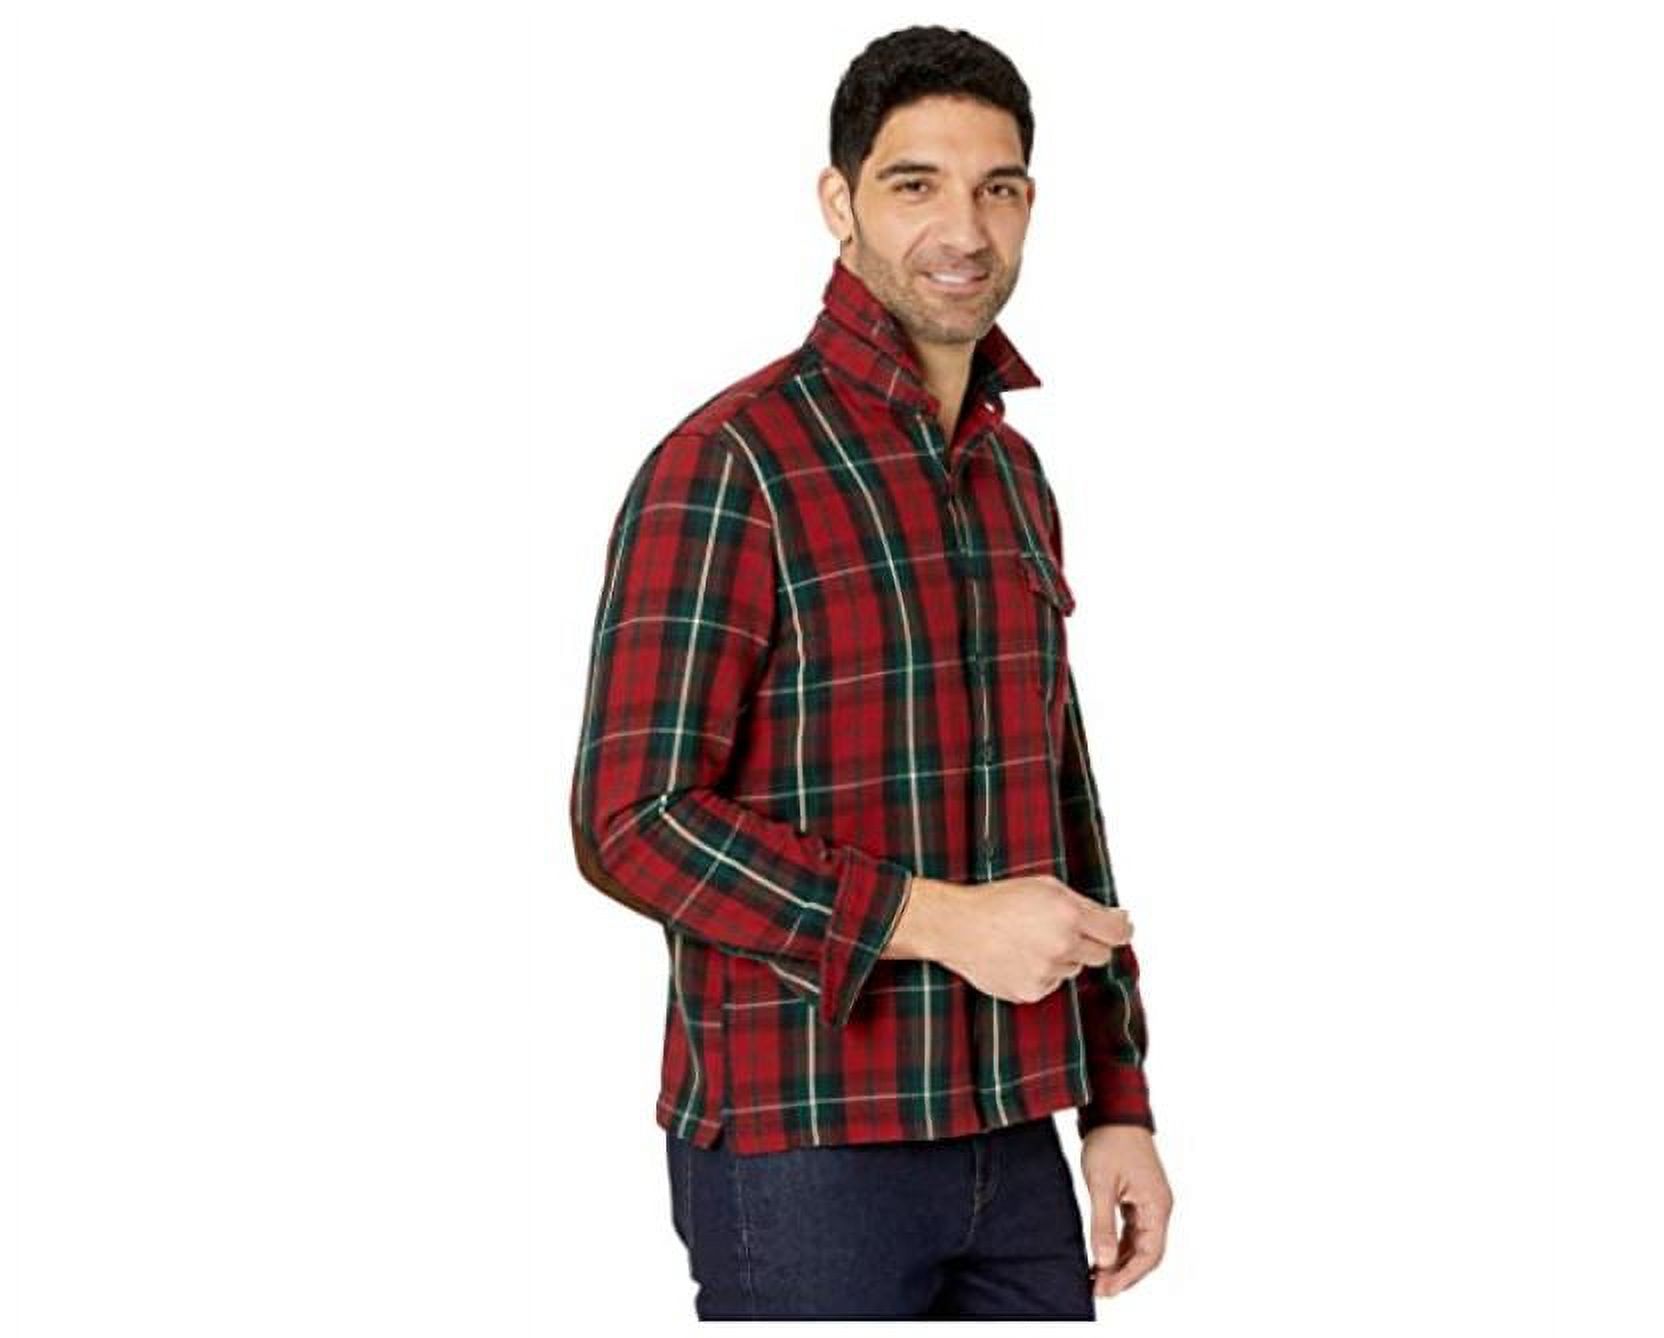 Polo Ralph Lauren Men's Red Classic Fit Plaid Twill Shirt, Large - image 2 of 6